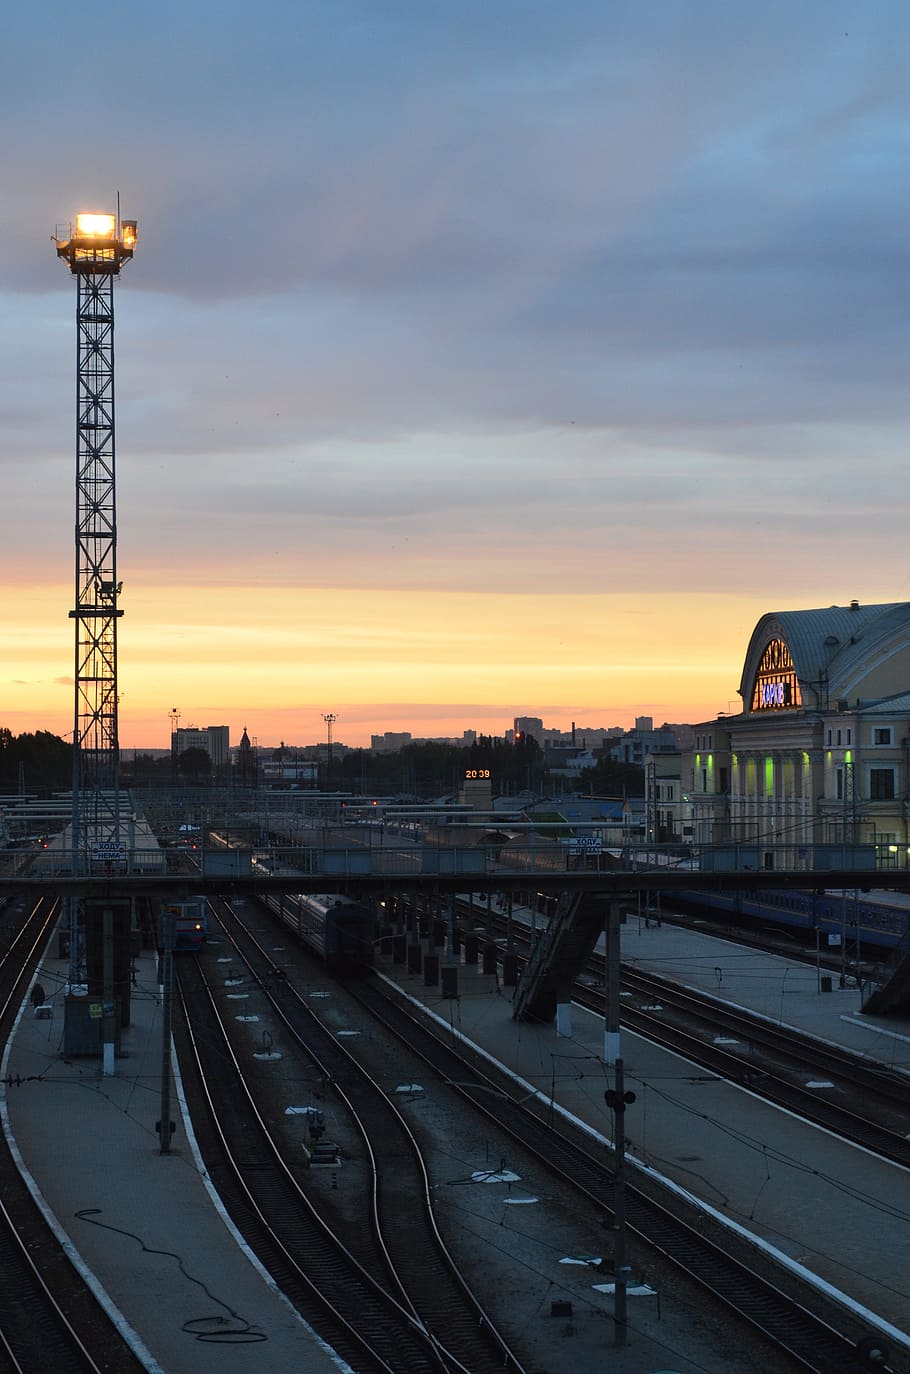 station, rails, trains, stand by, sunset, evening, sky, train, illustration, composition